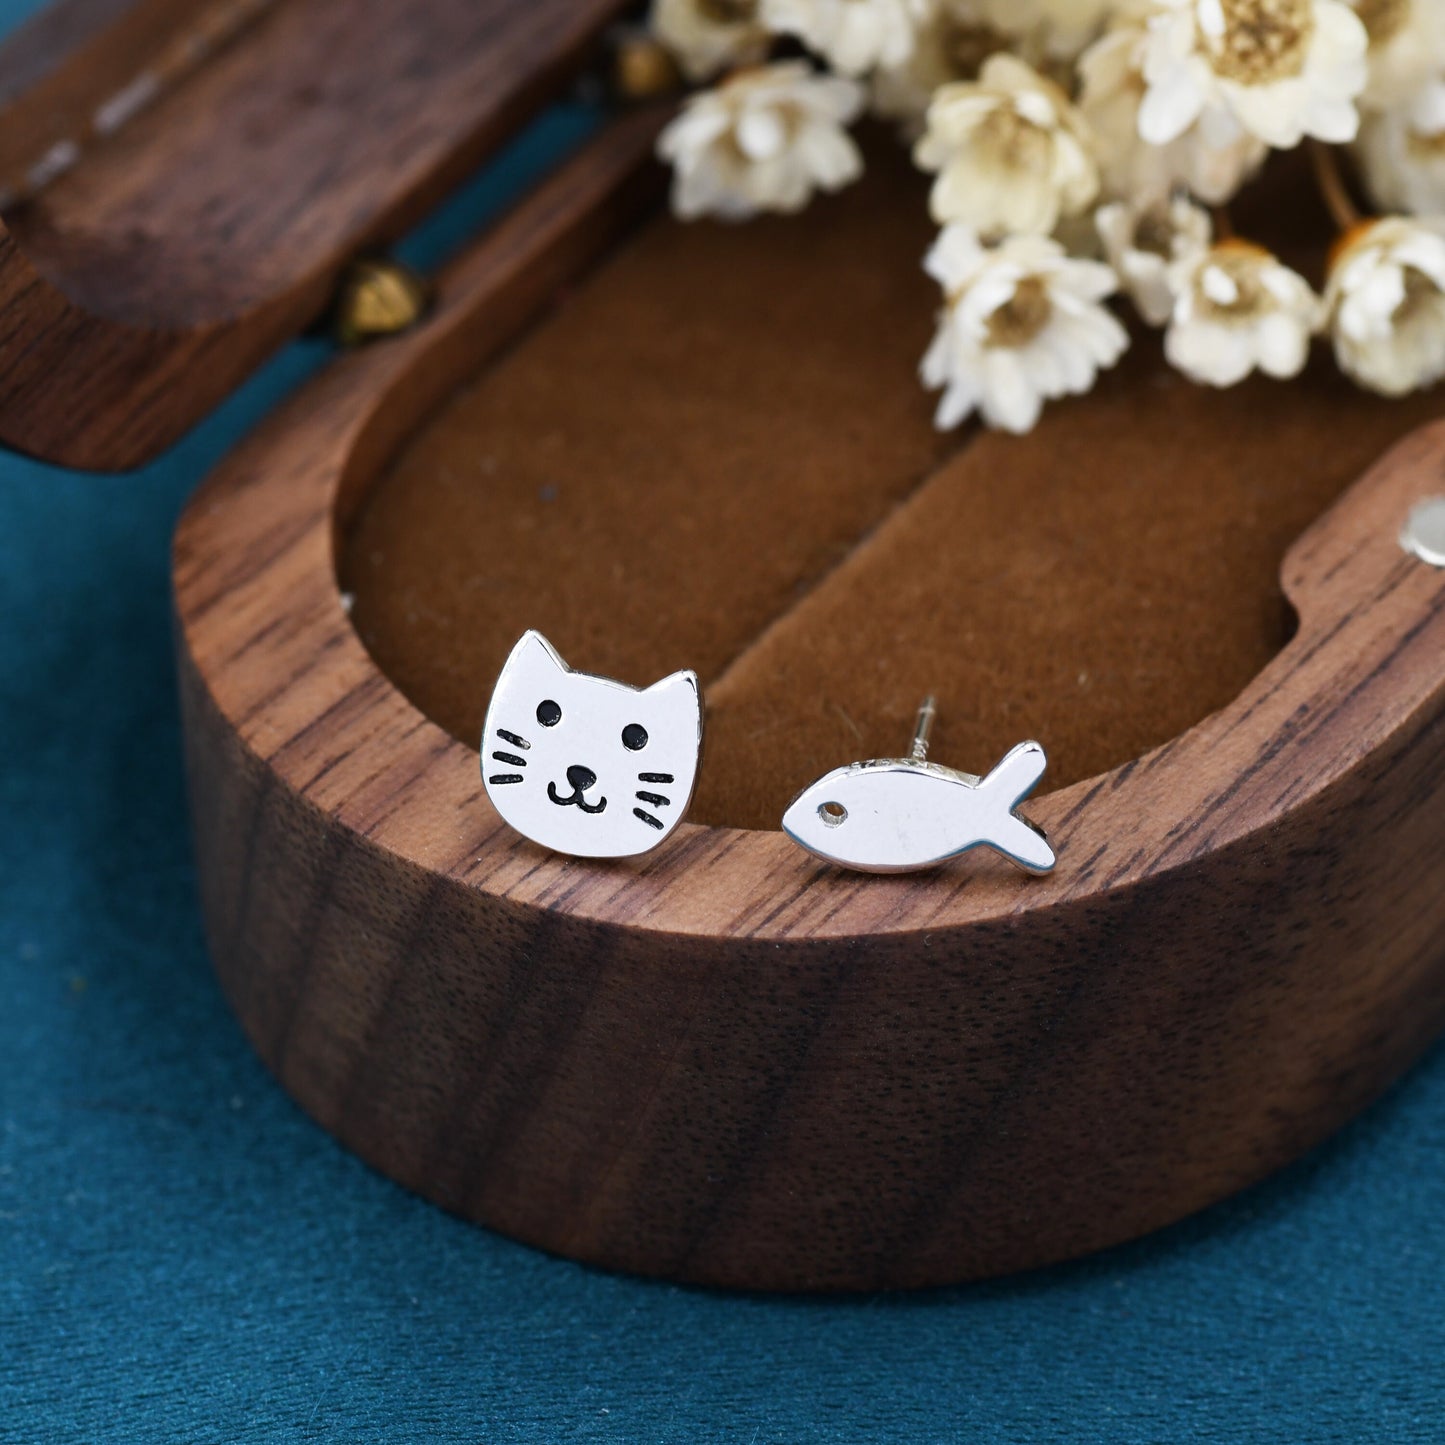 Mismatched Cat and Fish Stud Earrings in Sterling Silver, Asymmetric Cat and Fish Earrings, Cute Cat Lover Earrings